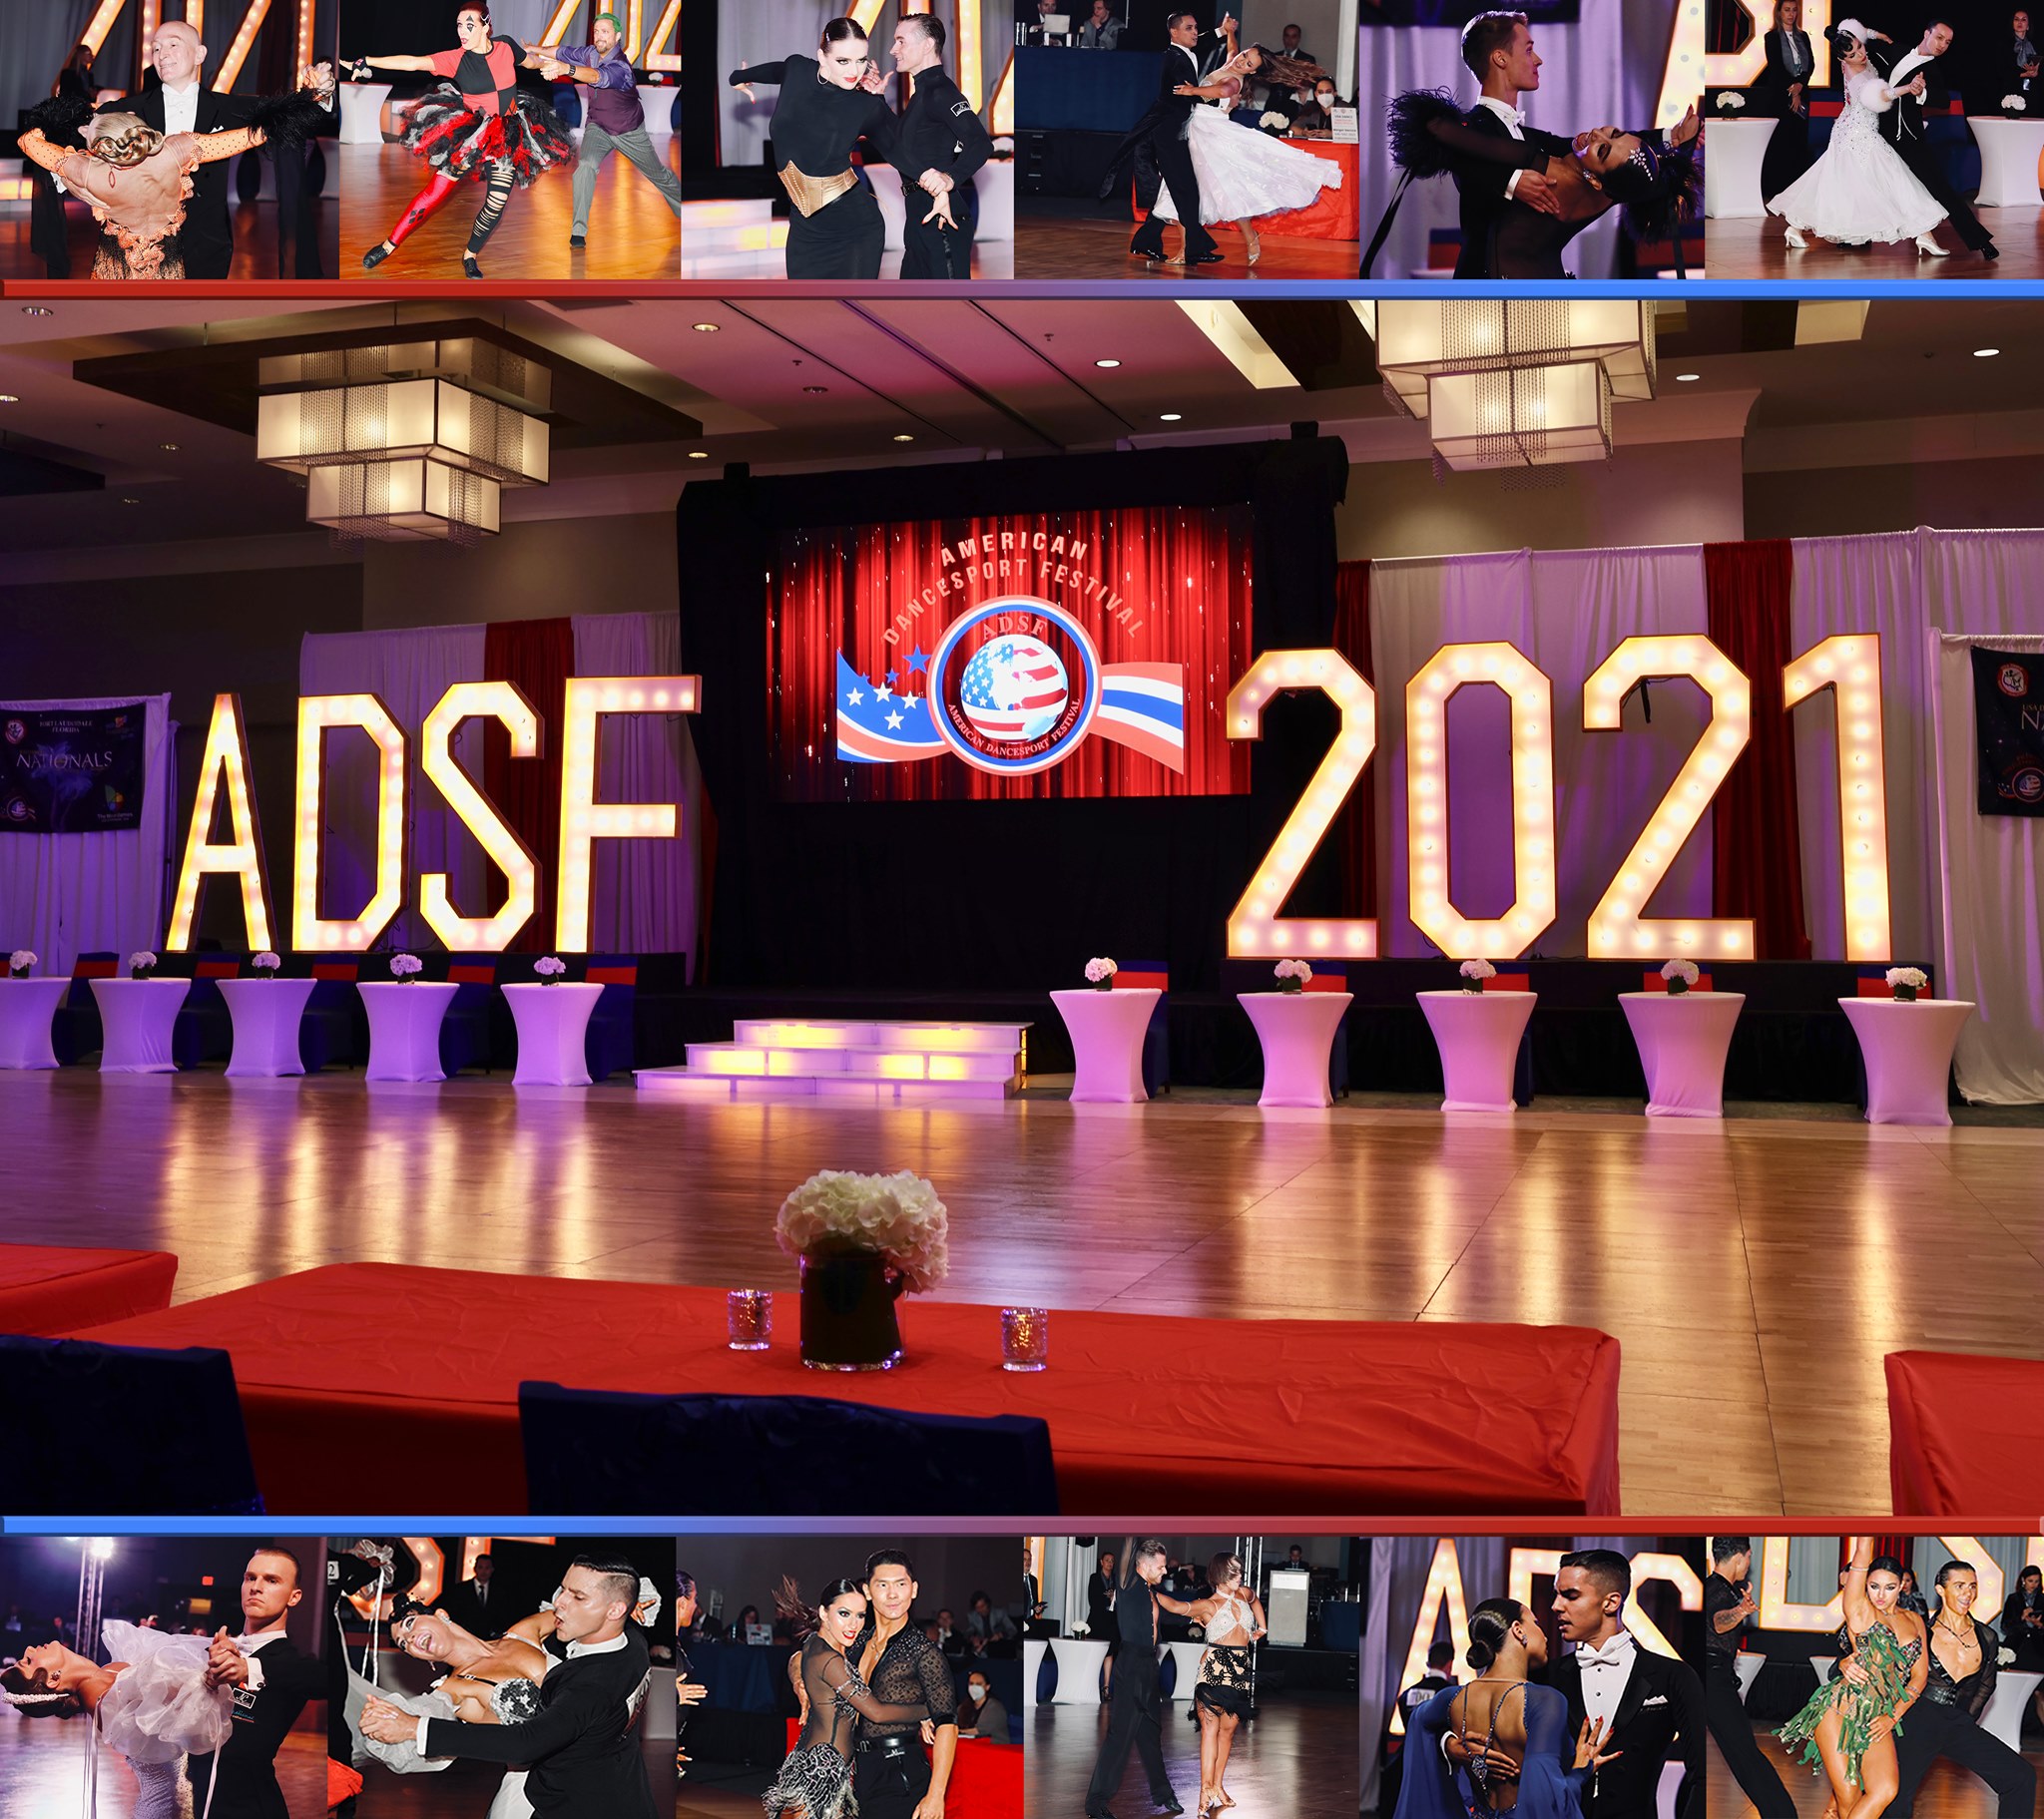 Images from the Exciting ADSF 2021!!